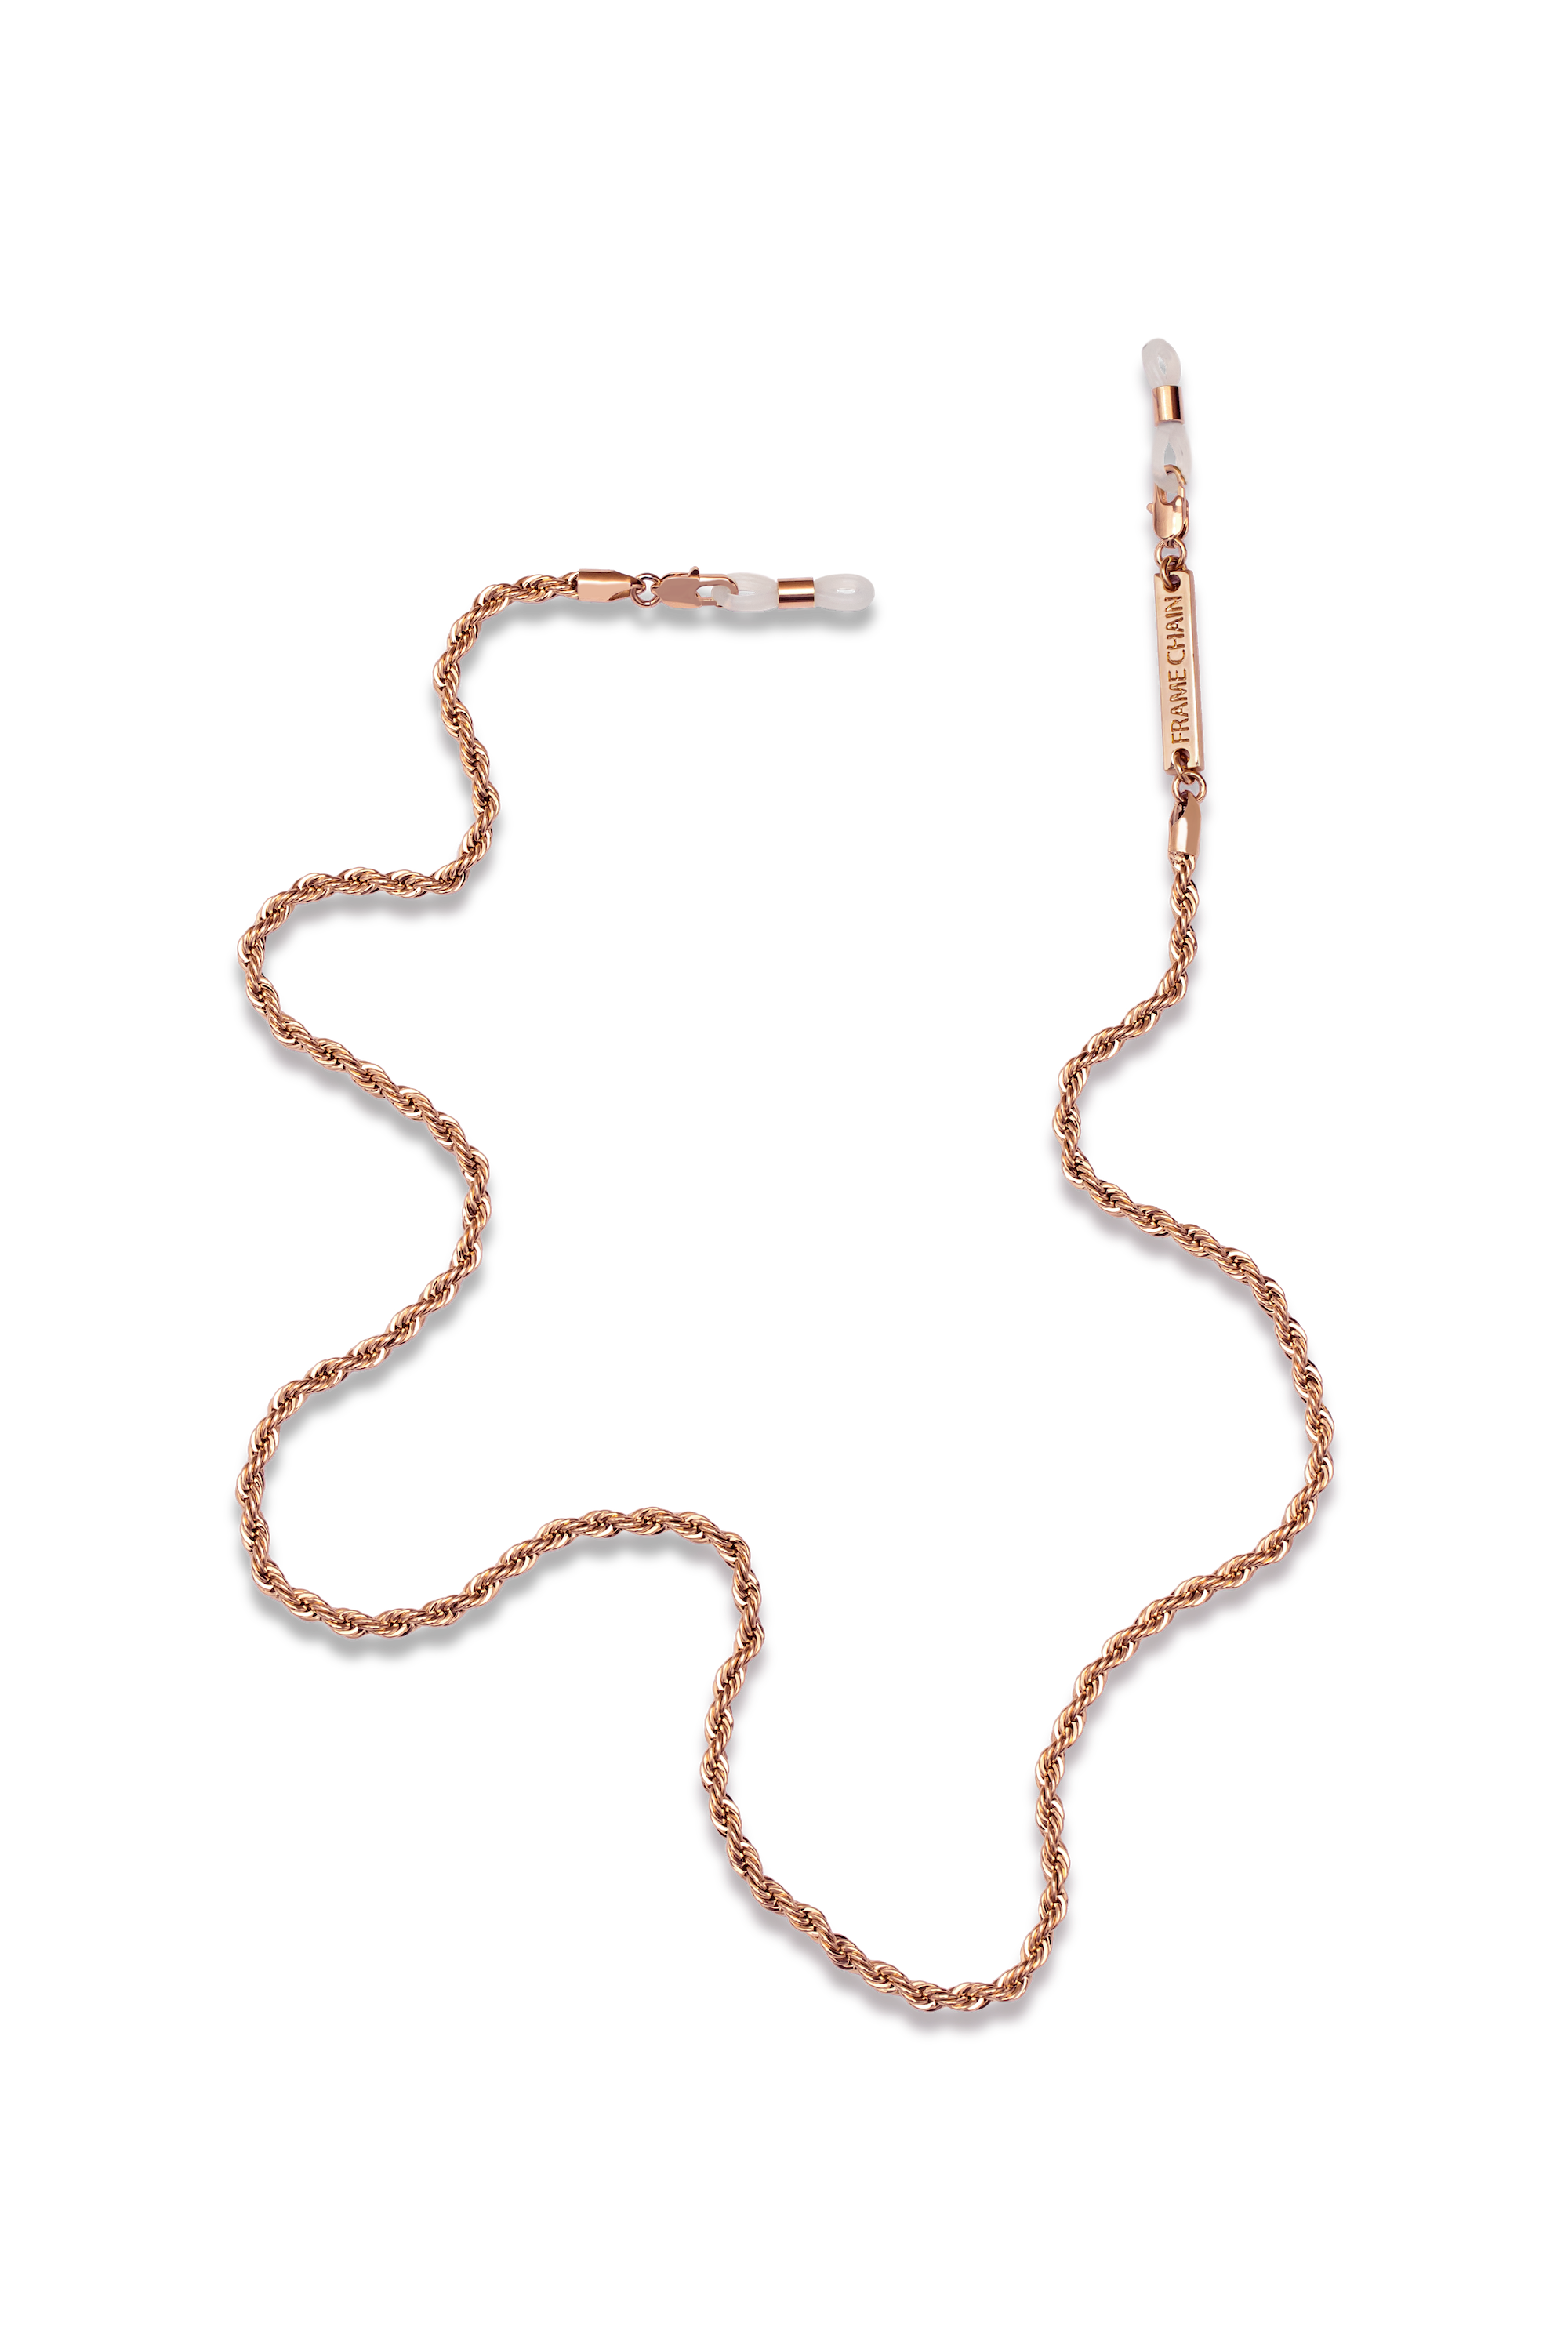 ROLLER CHAIN in ROSE GOLD - FRAME CHAIN